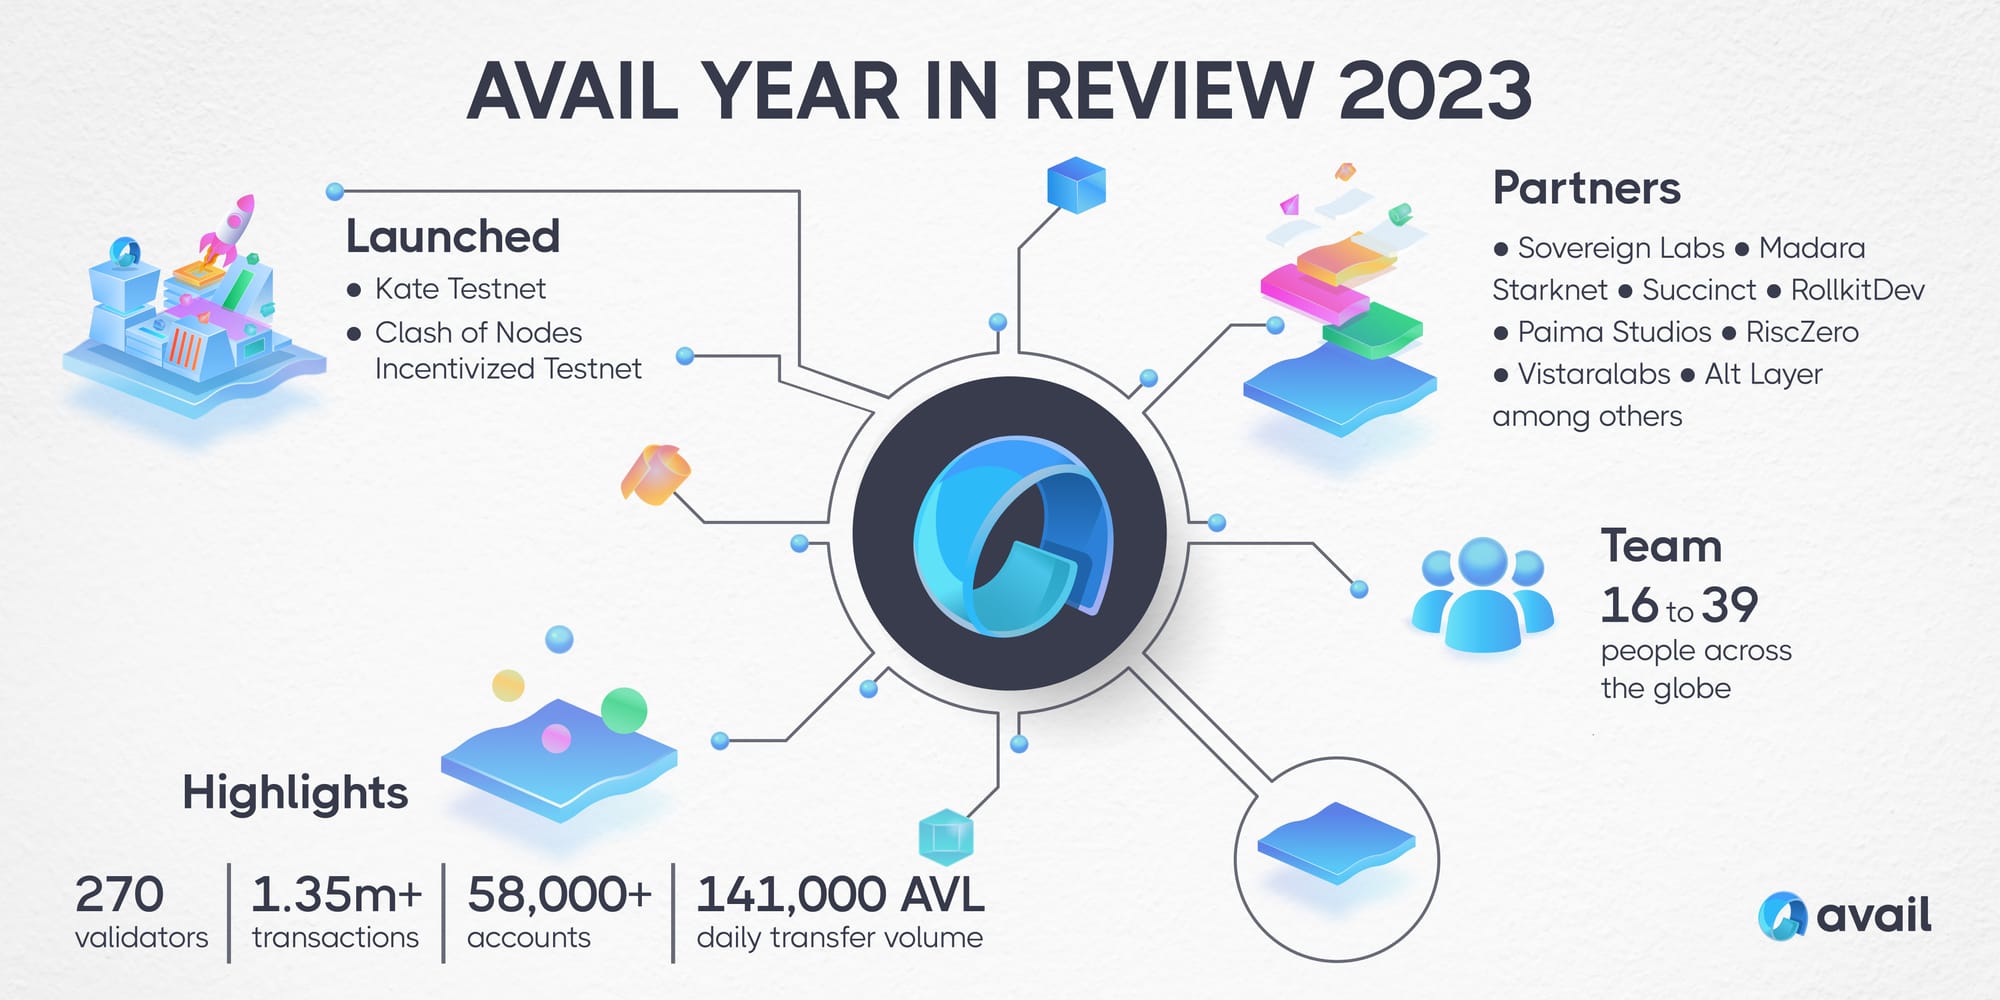 Snapshot 2023: Avail's Year End Review